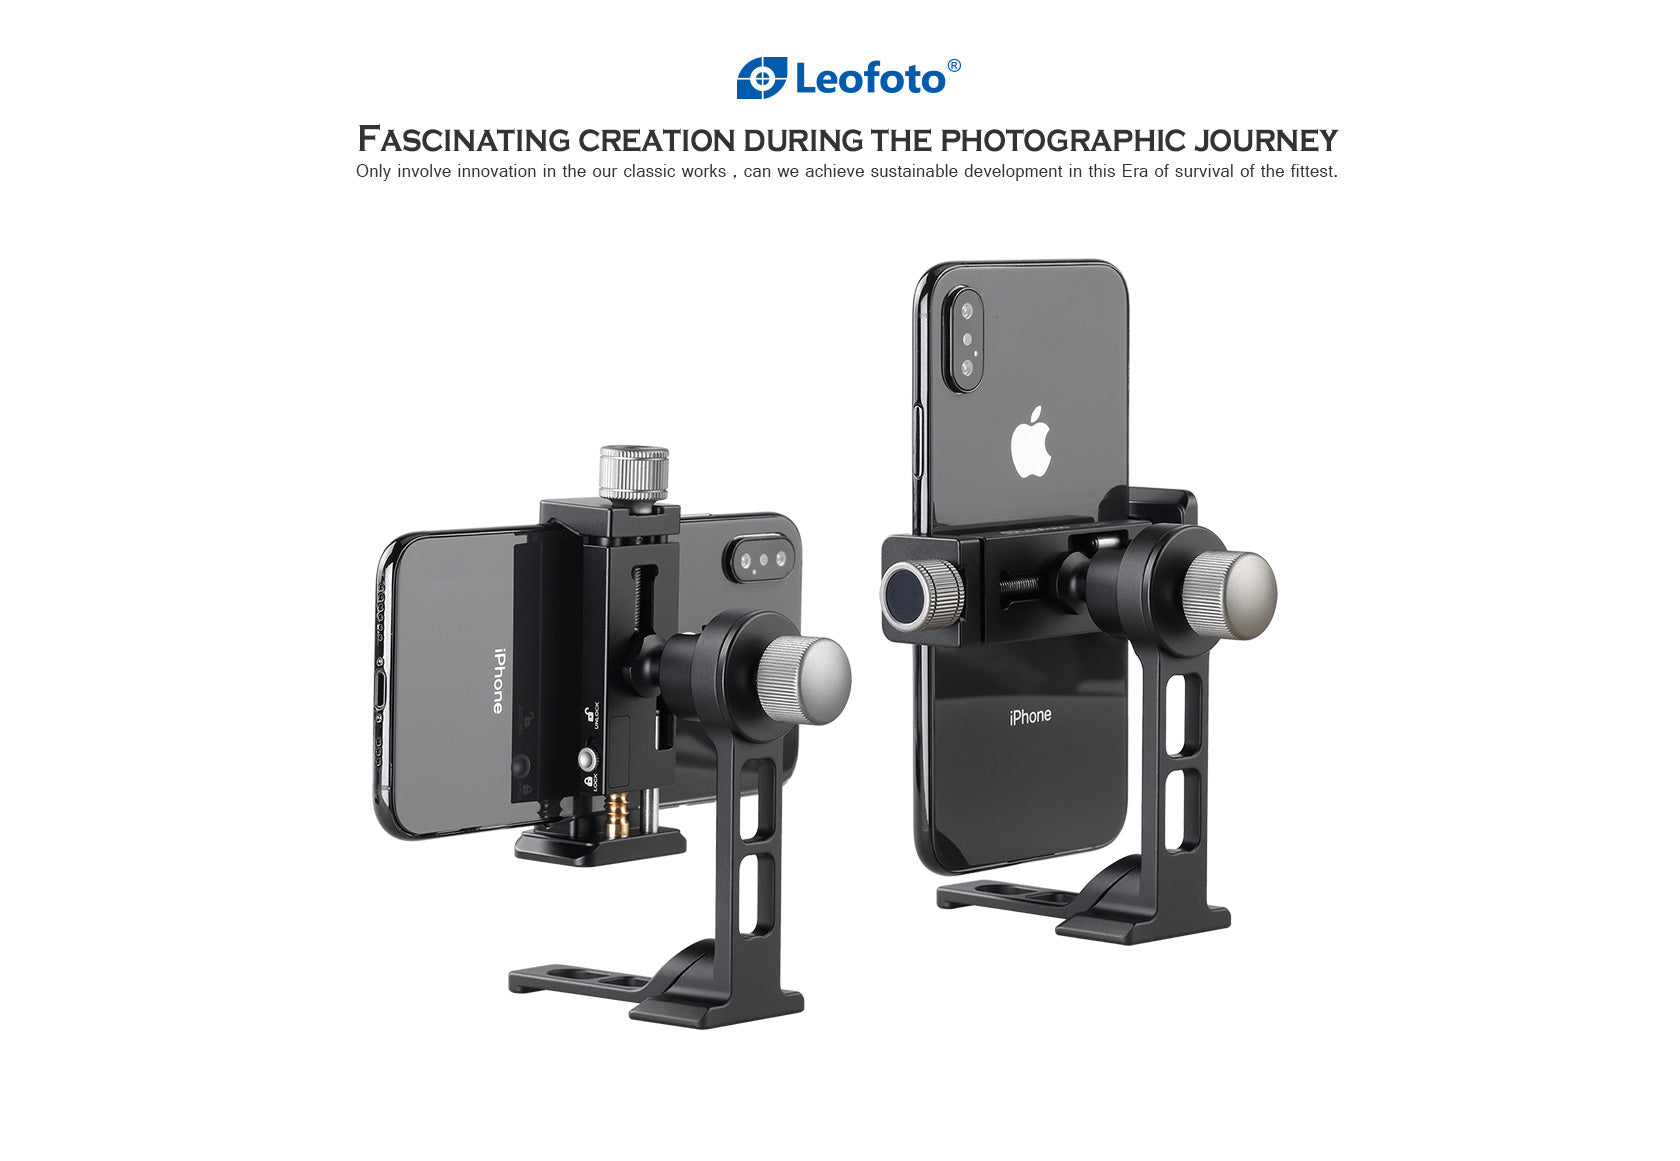 Leofoto PS-3 Multi-functional Foldable Cellphone Stand with Arca-Compa